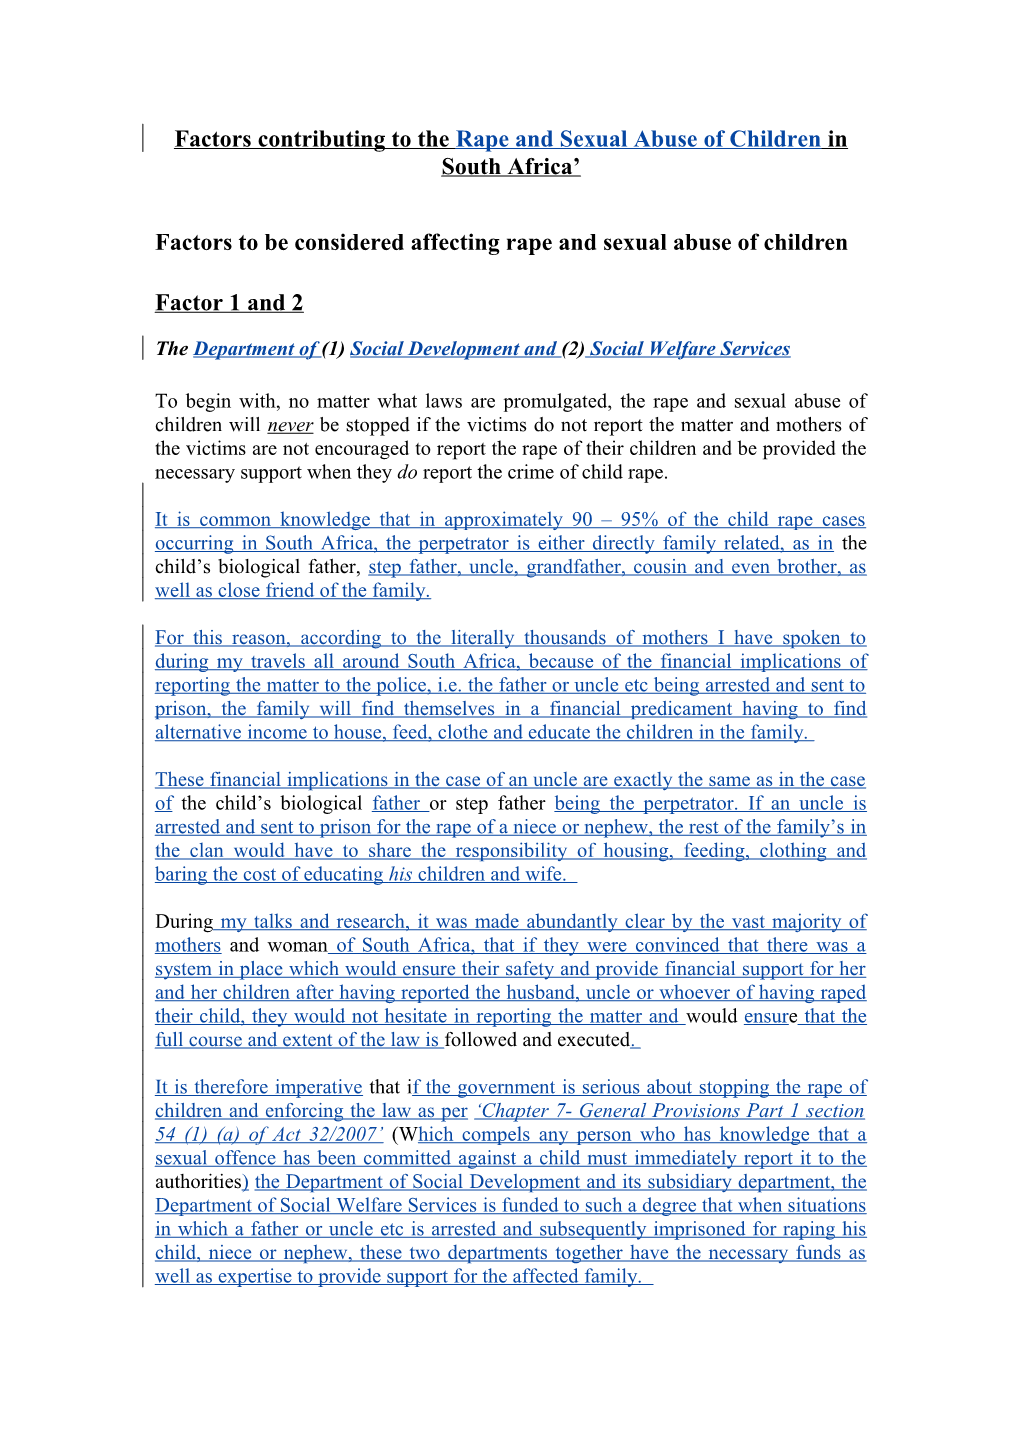 Factors Contributing to the Rape and Sexual Abuse of Children in South Africa